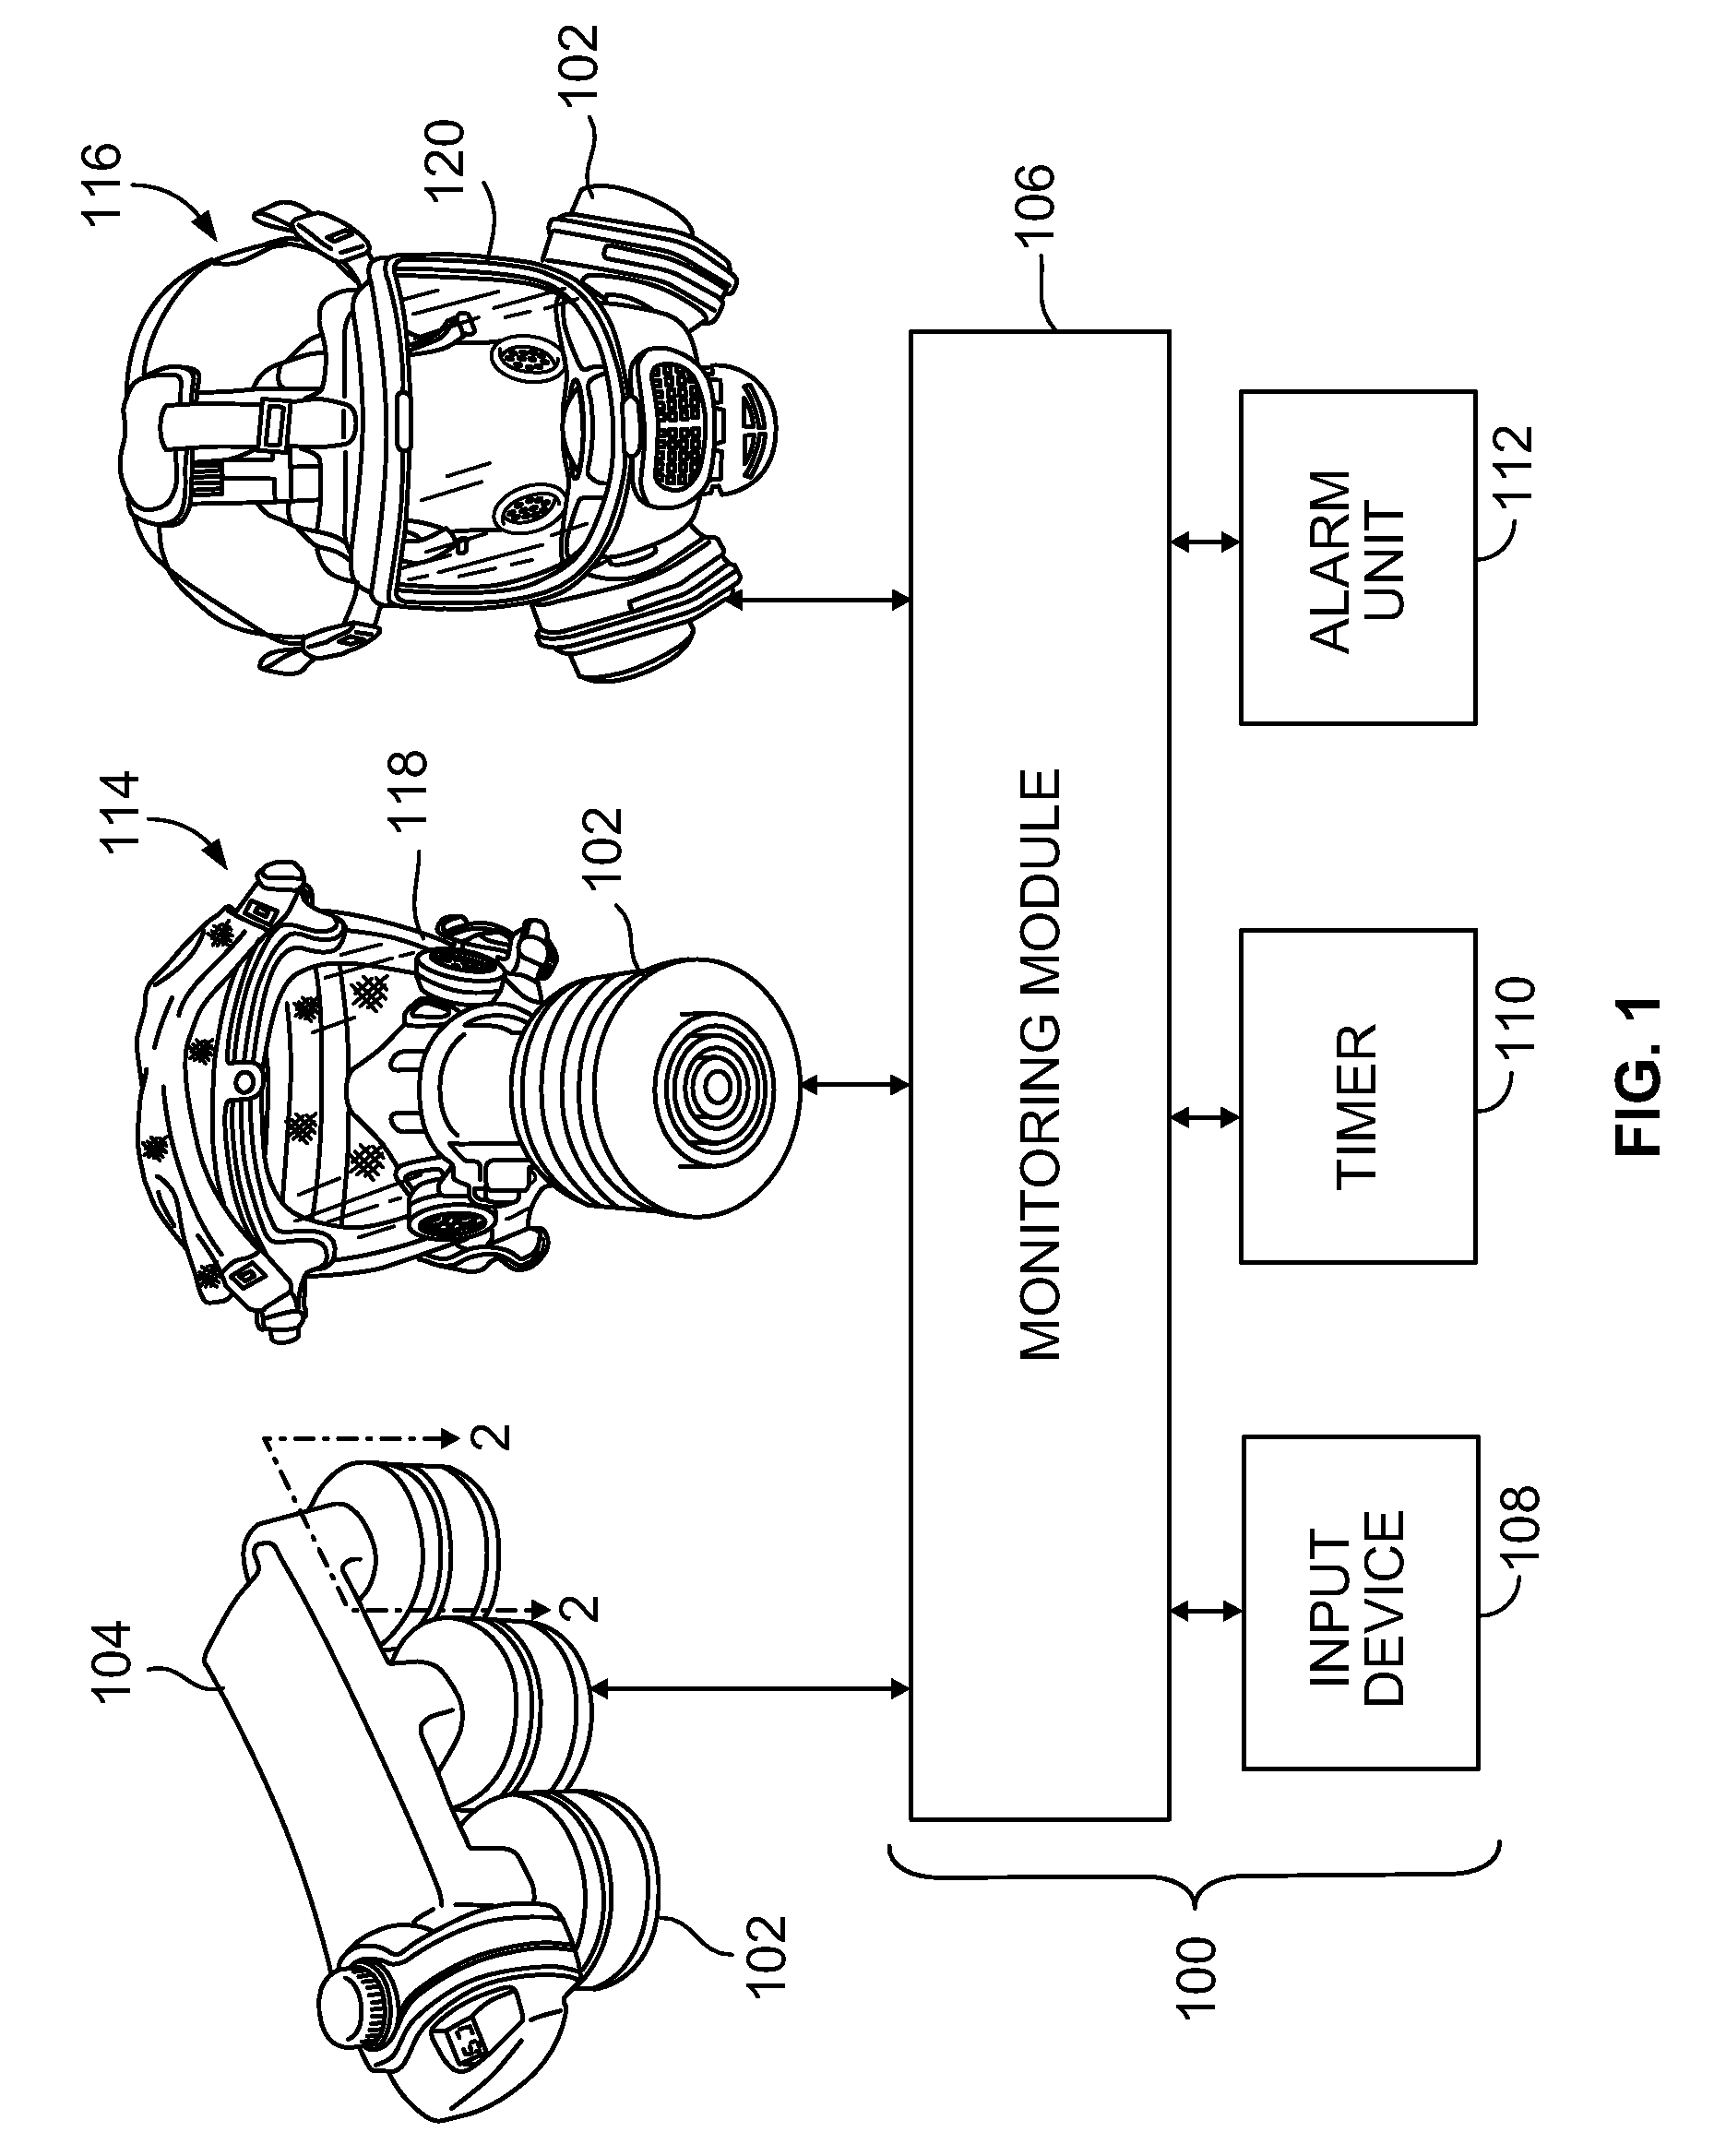 Systems and methods for determining filter service lives